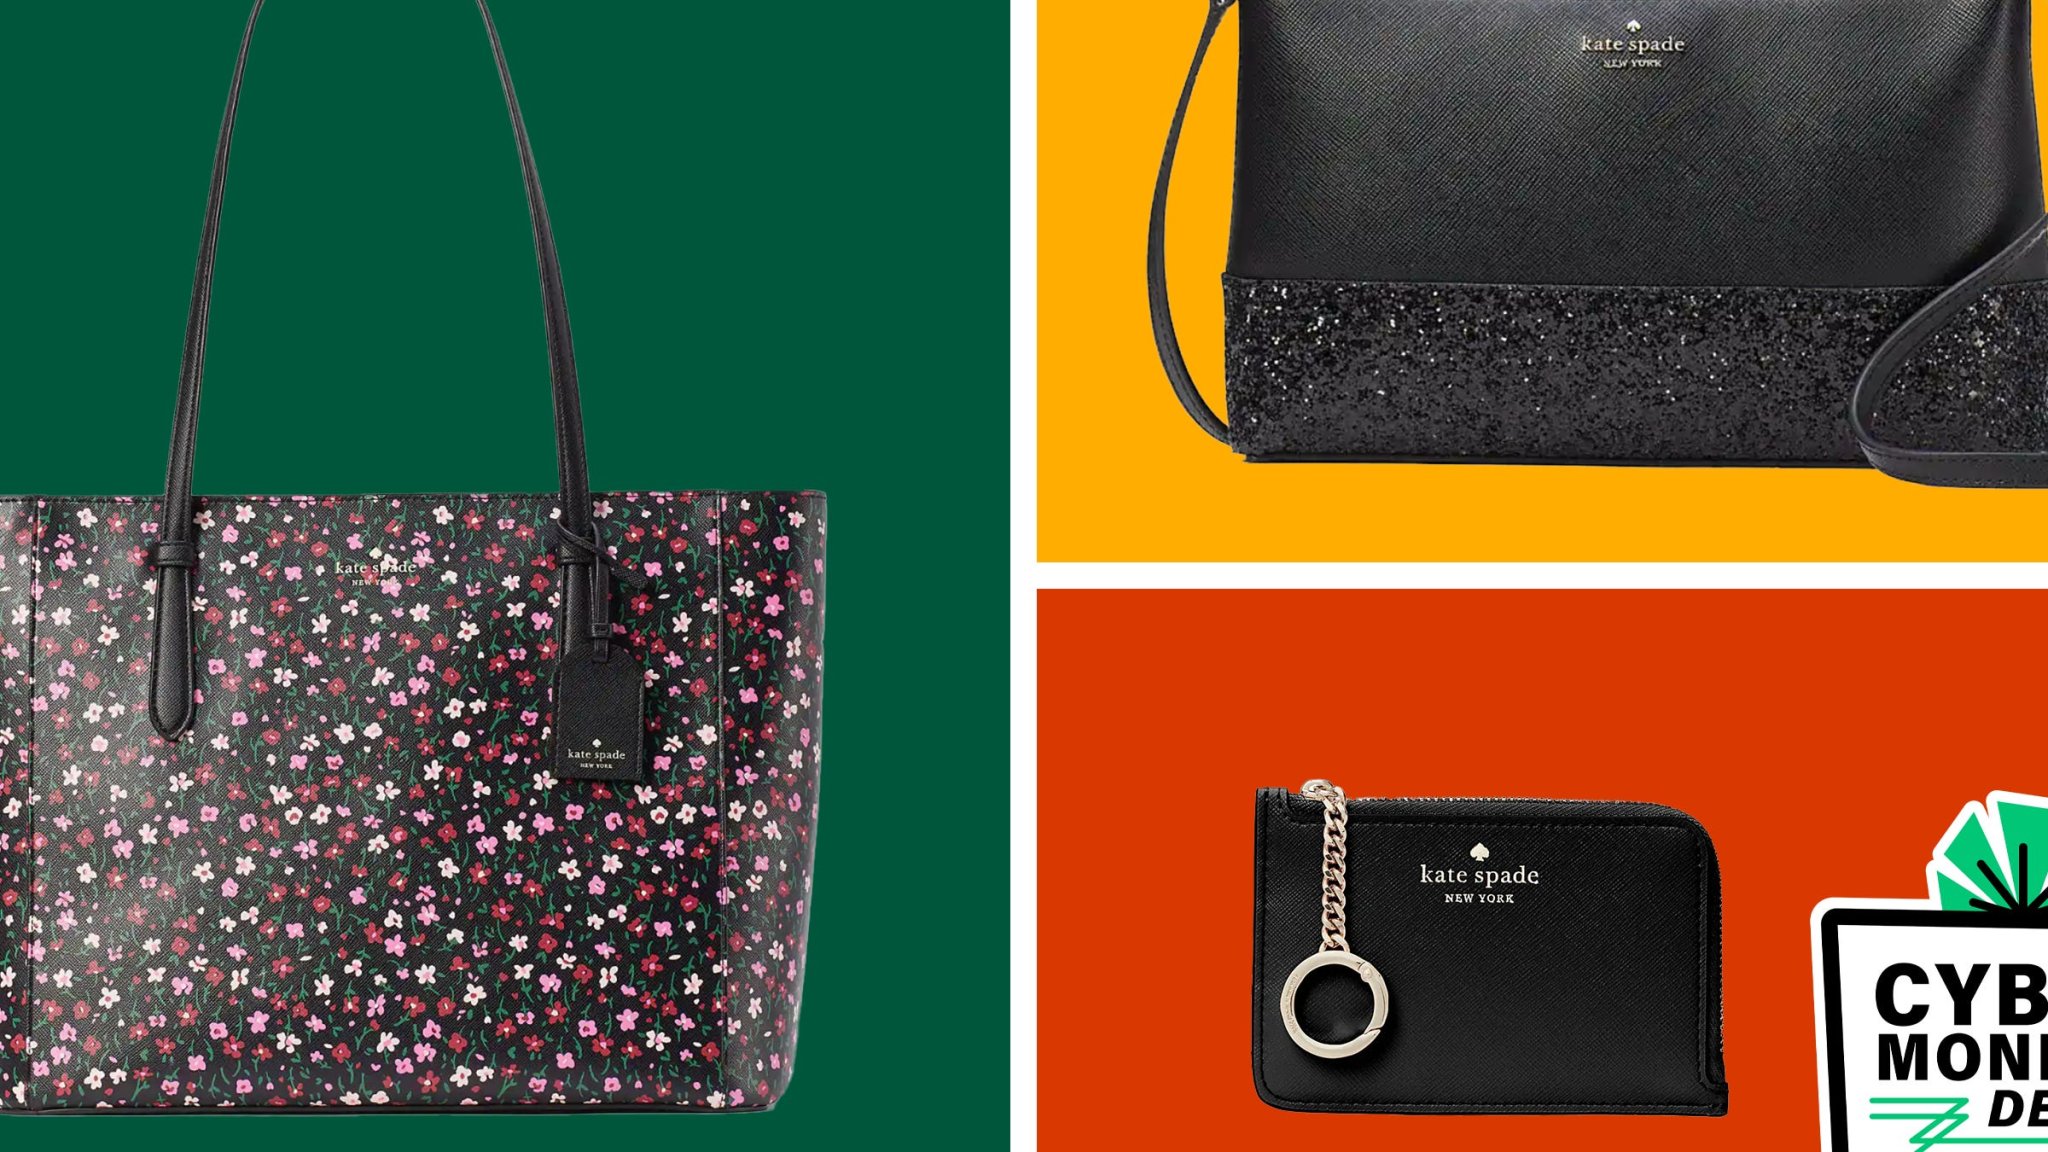 Kate Spade bags are still on super sale this week—shop bags as low as $69 while you still can